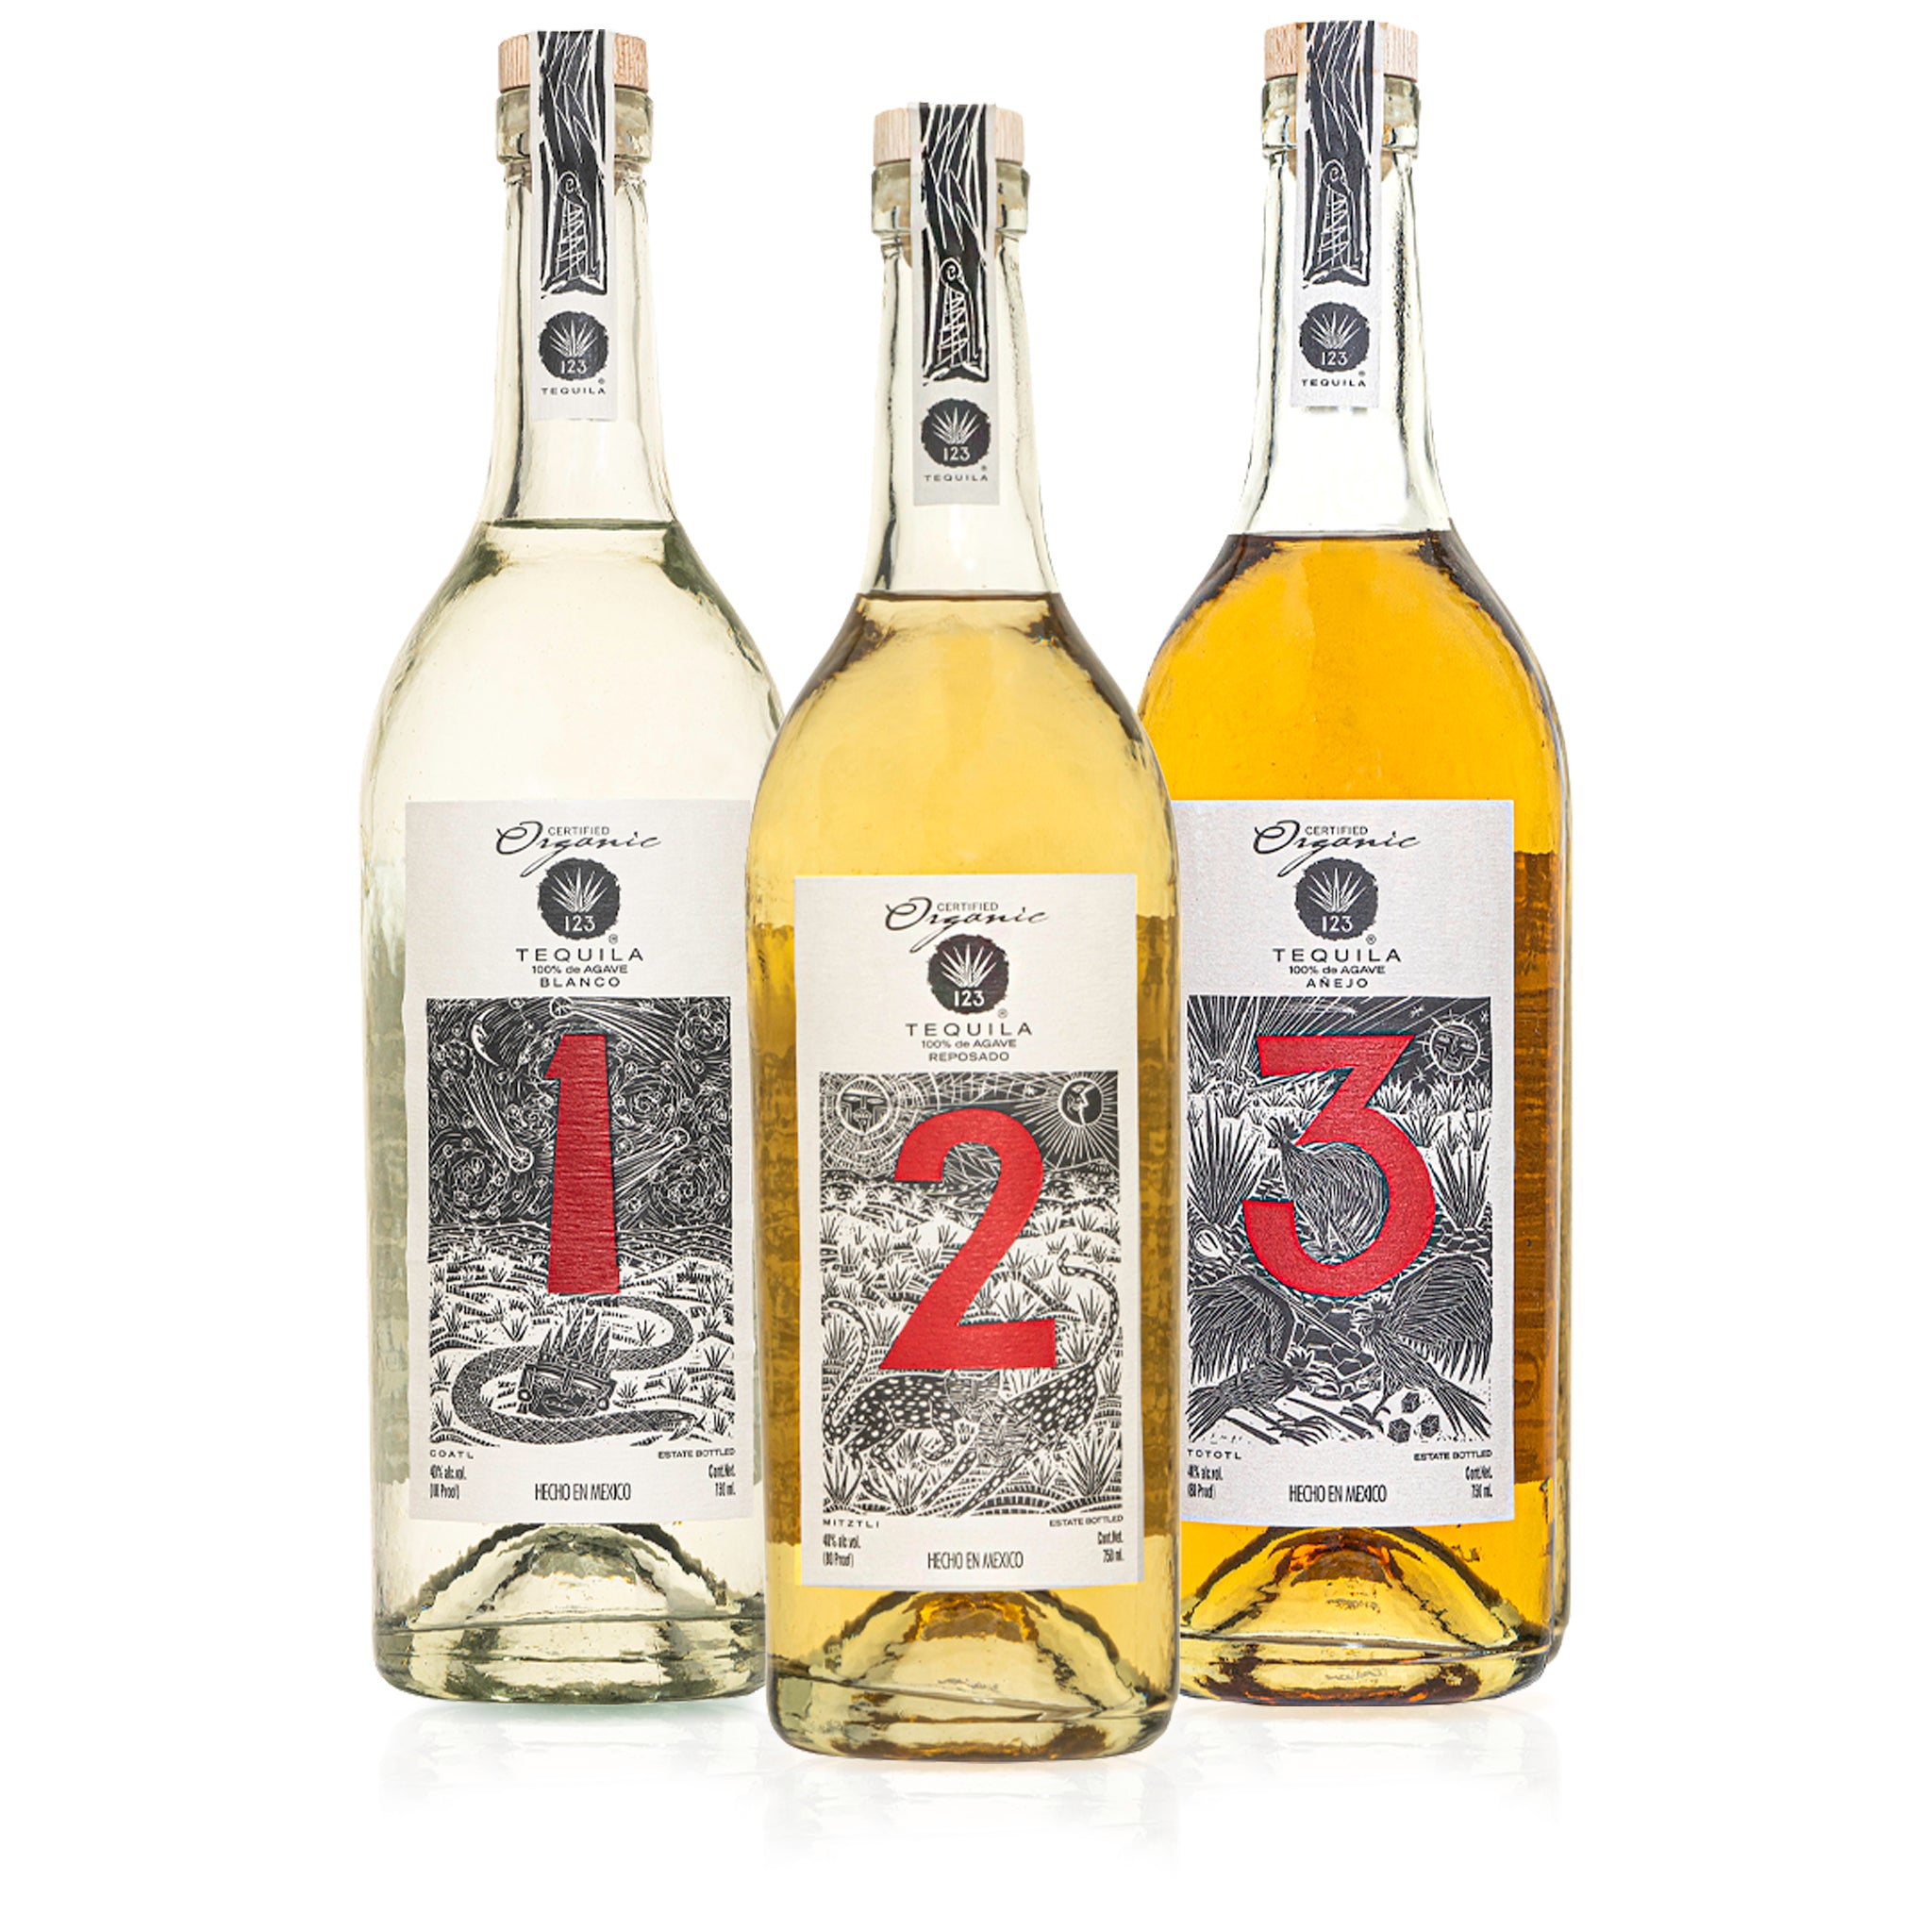 123 Organic Tequila Family Collection